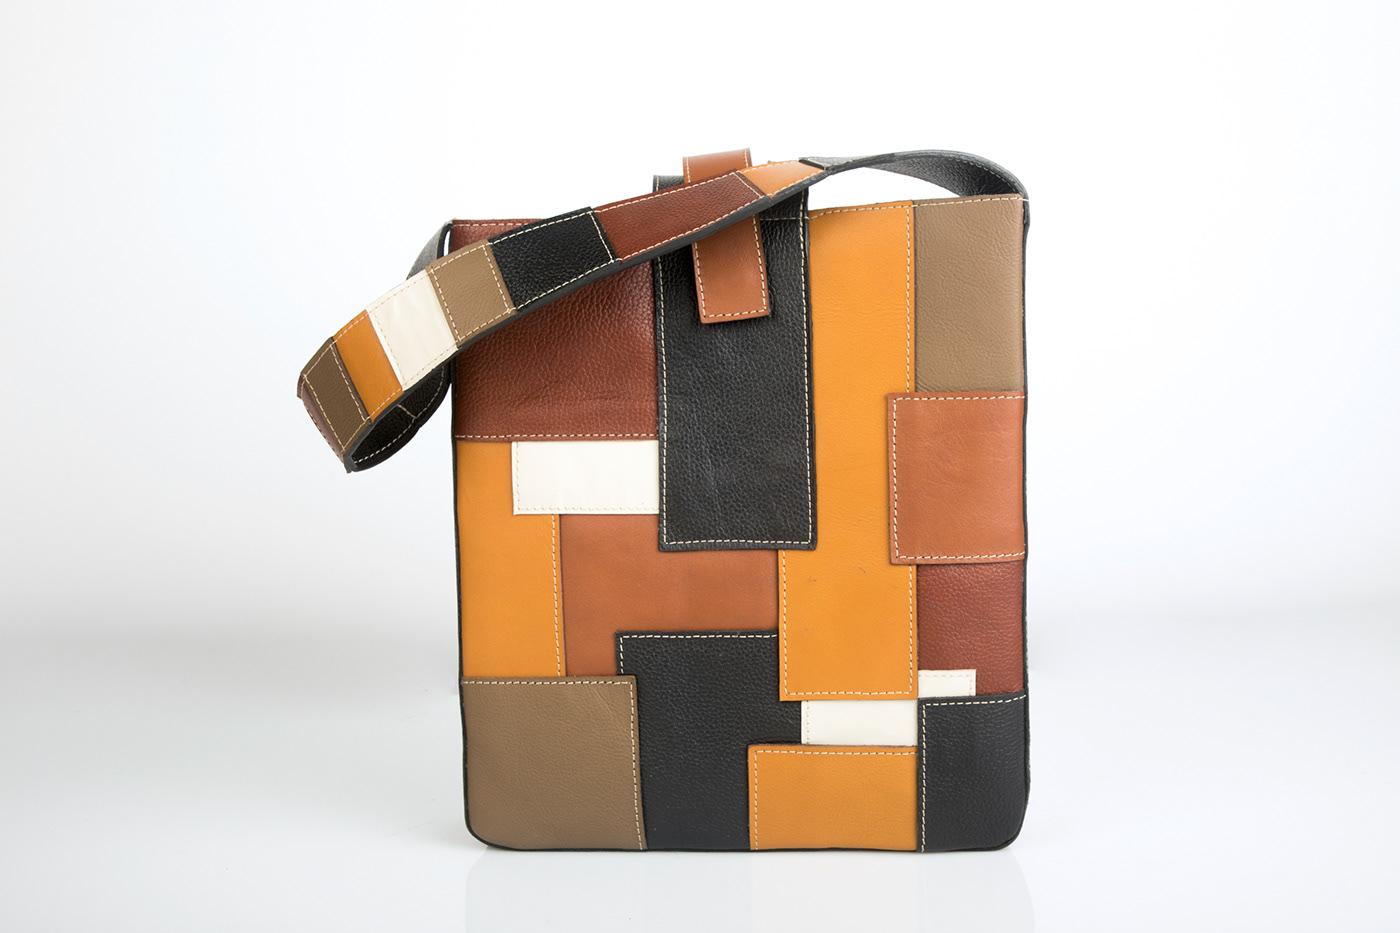 upcycled leather upcycling accessory design leather patchwork